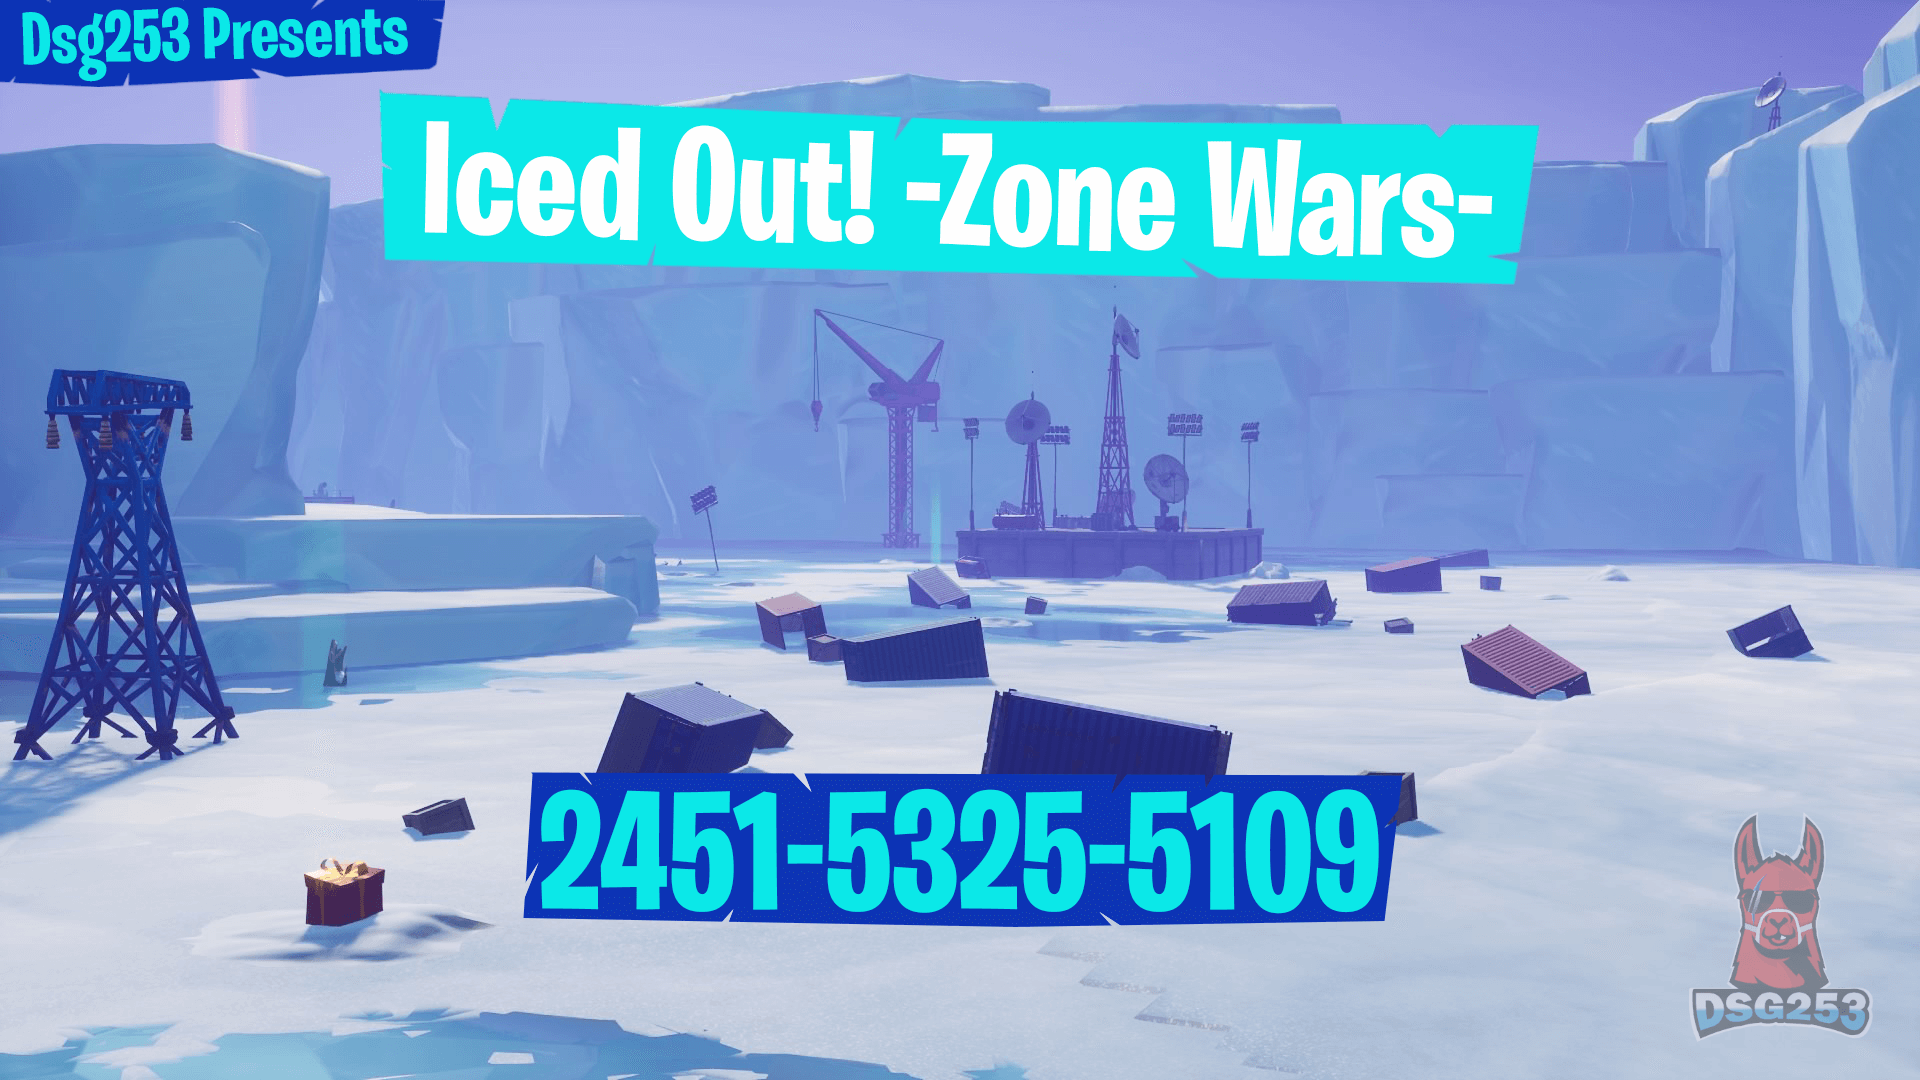 ICED OUT! -ZONE WARS- BY DSG253 image 2